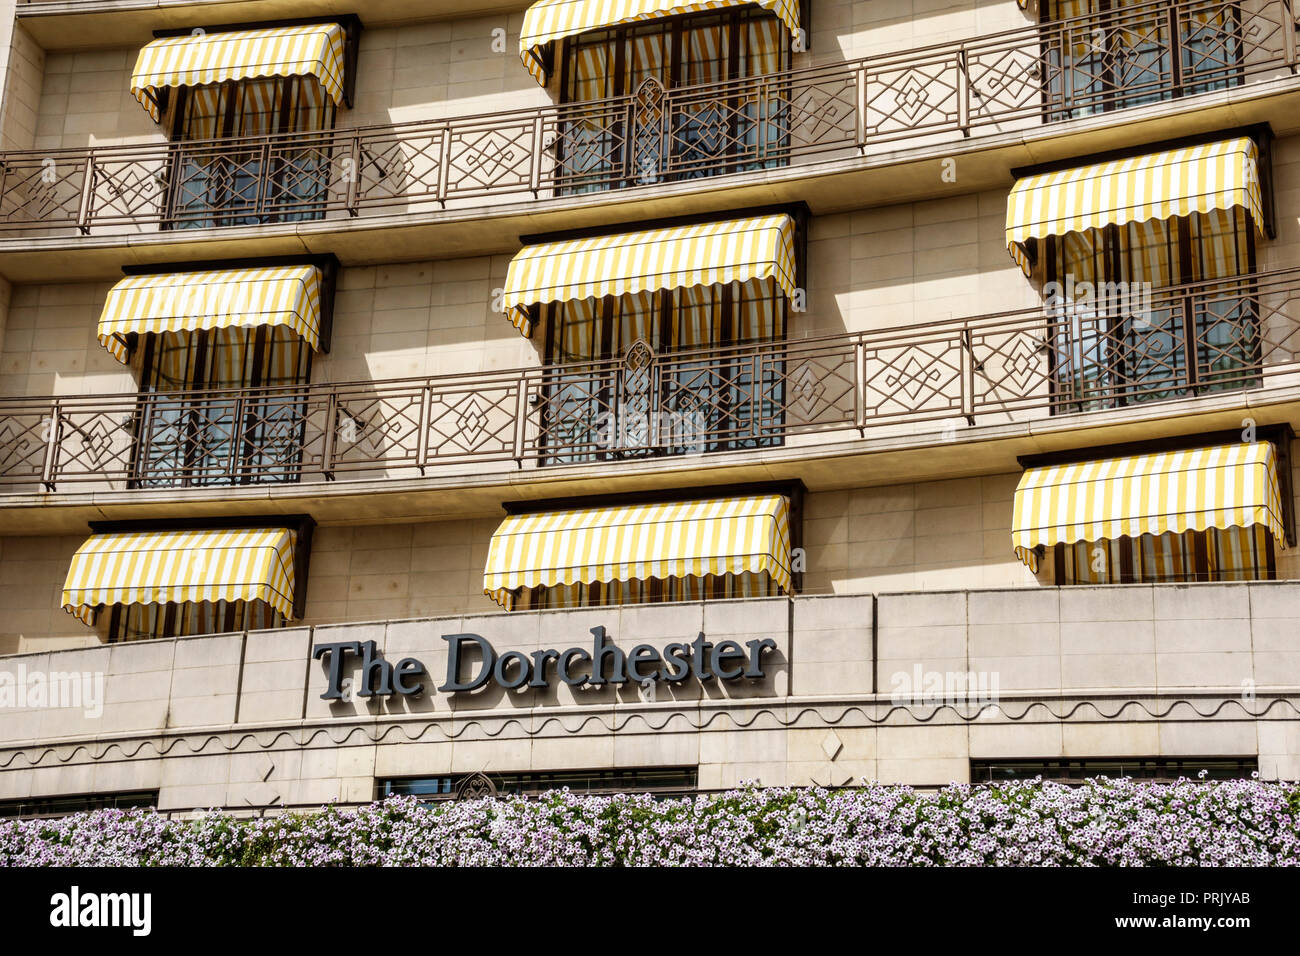 London England,UK,West End City Westminster Mayfair,Park Lane,The Dorchester,hotel,luxury 5-star,outside exterior,facade,balconies,awnings,sign,UK GB Stock Photo